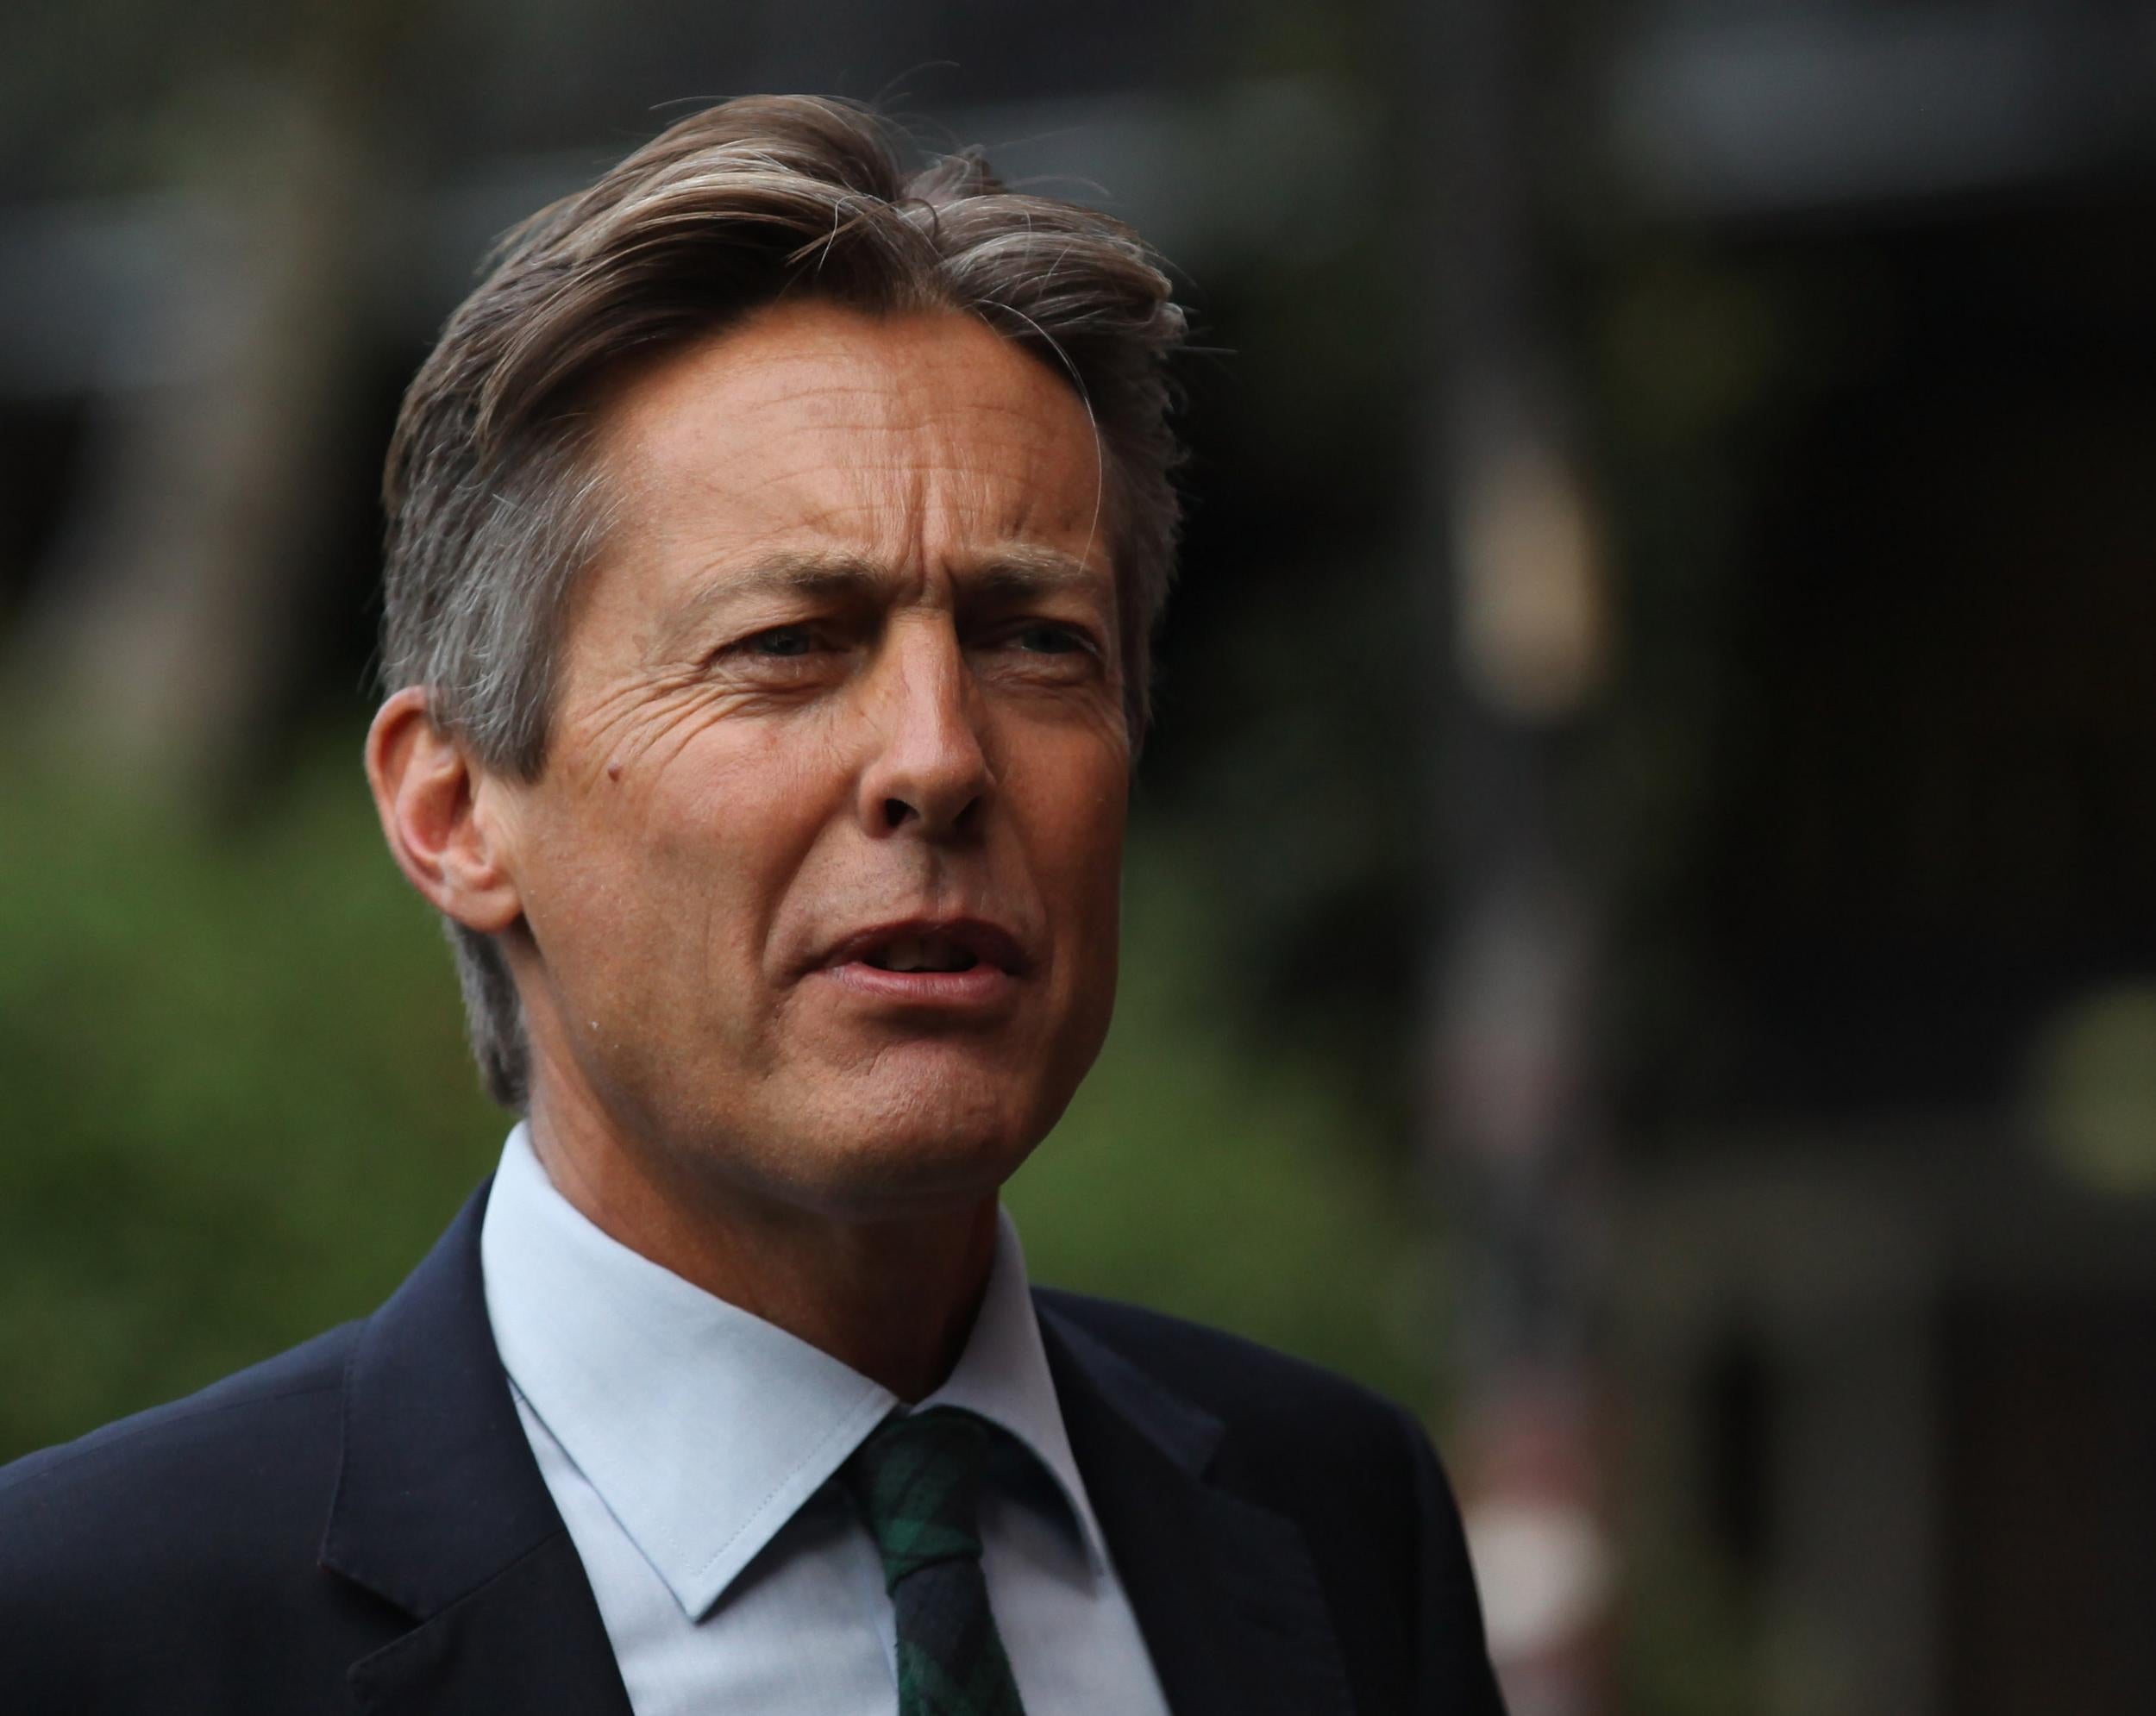 Ben Bradshaw served as Secretary of State for Culture, Media and Sport under Gordon Brown and is celebrated as one of Labour’s most influential LGB politicians